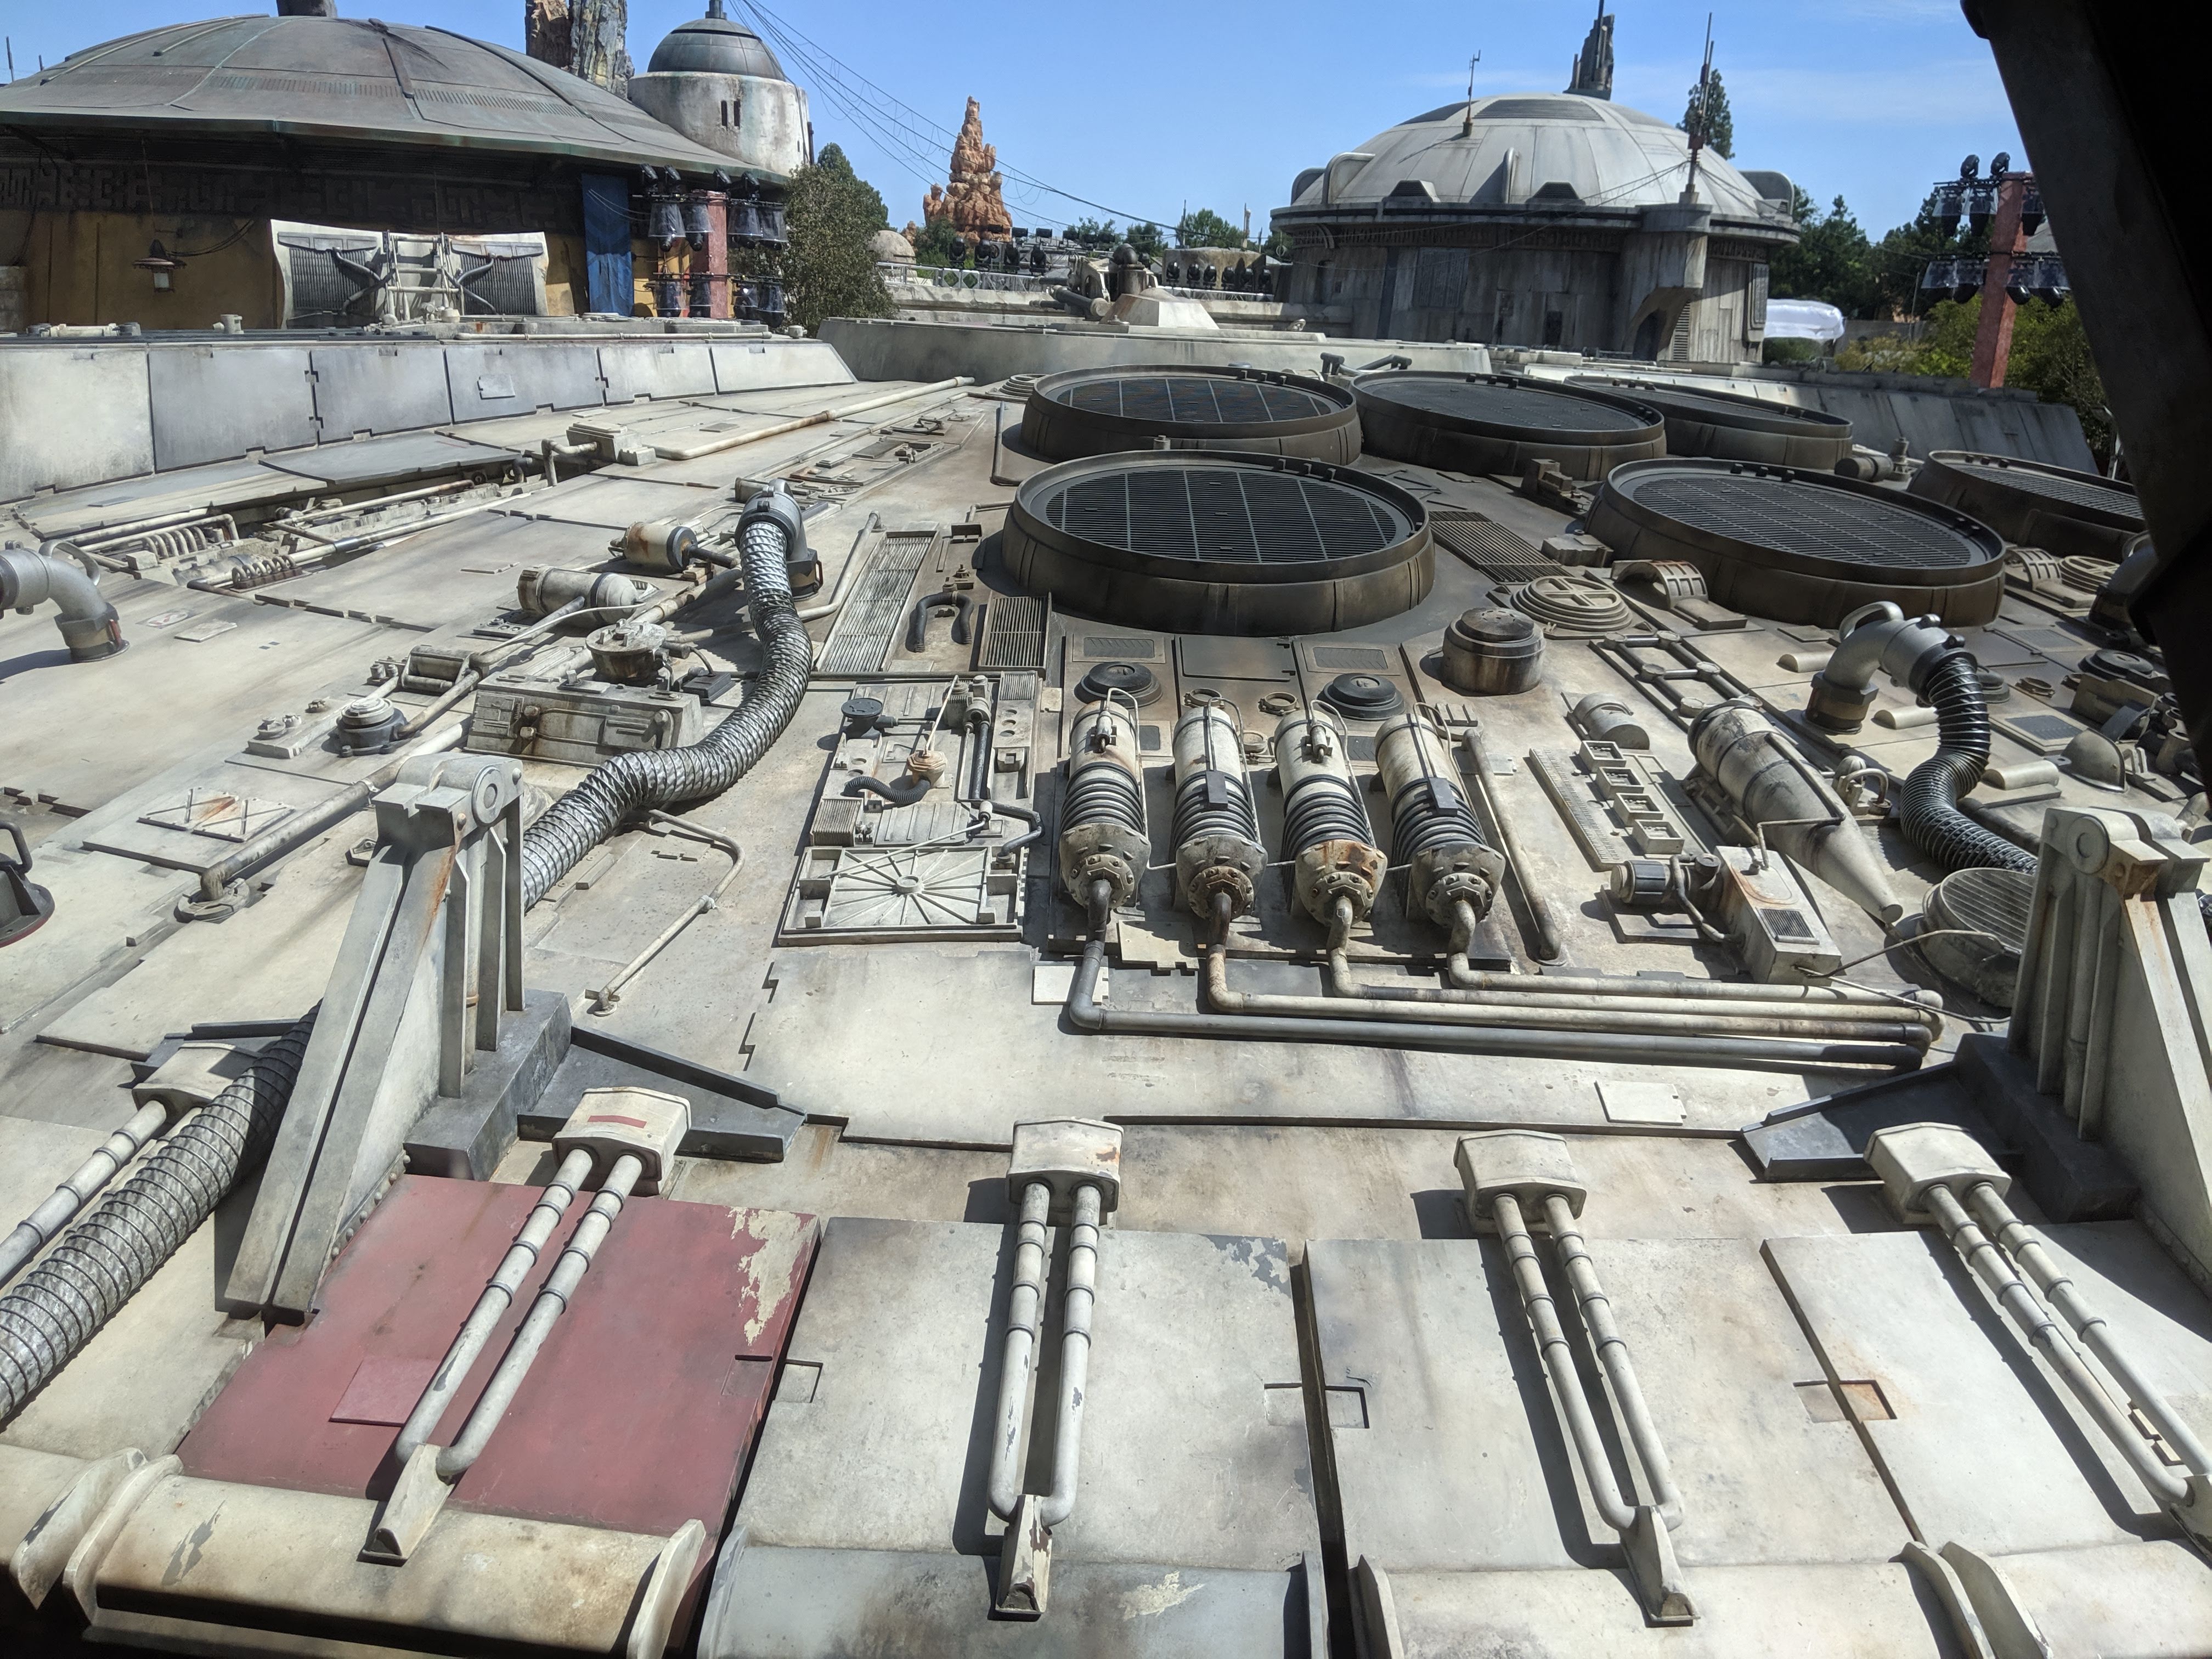 Get up close and personal with the Millennium Falcon!